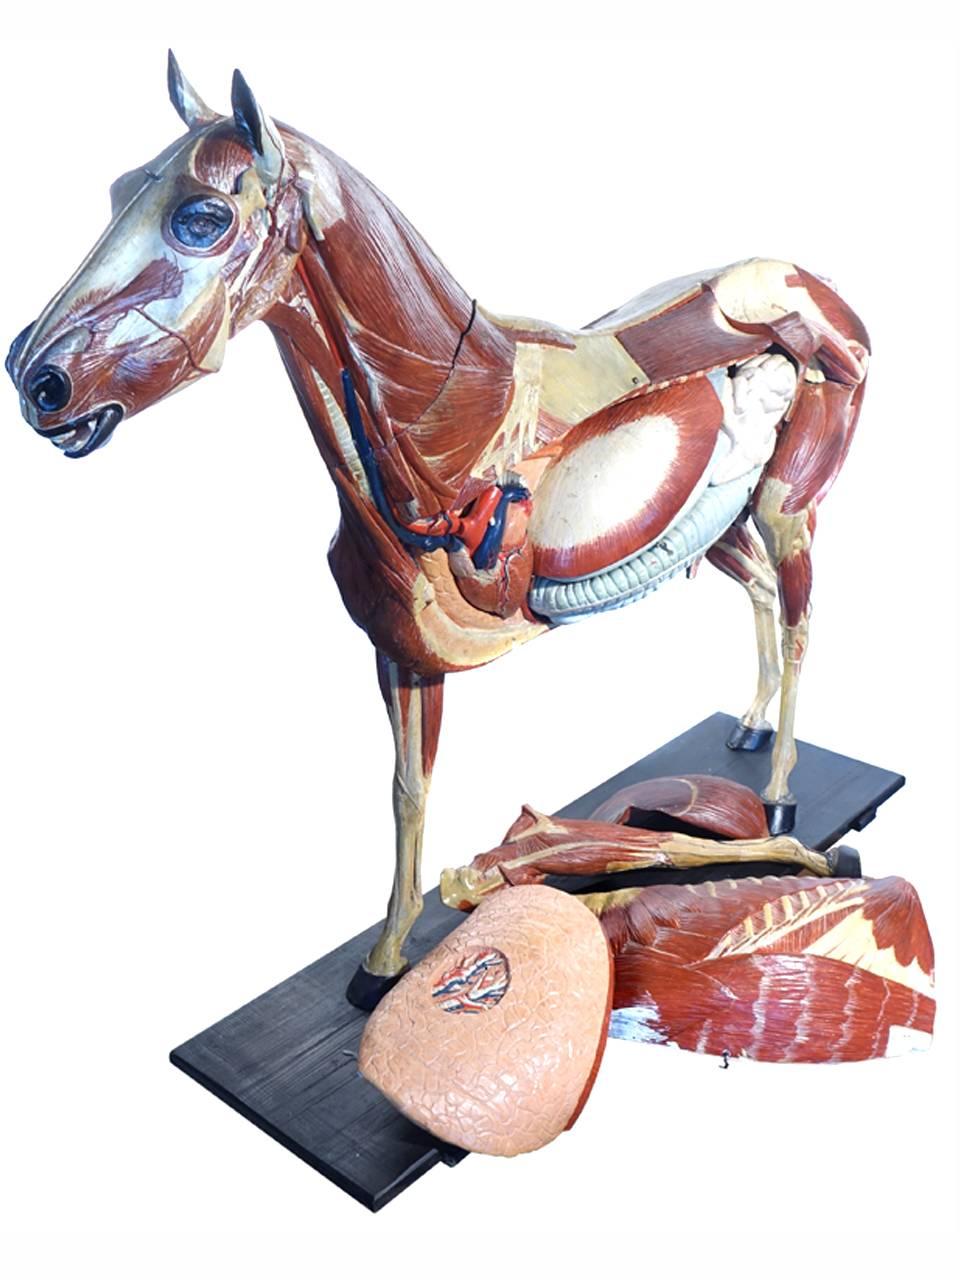 Industrial Rare German 1800s Anatomical Horse Model, Signed A.M.Sommer